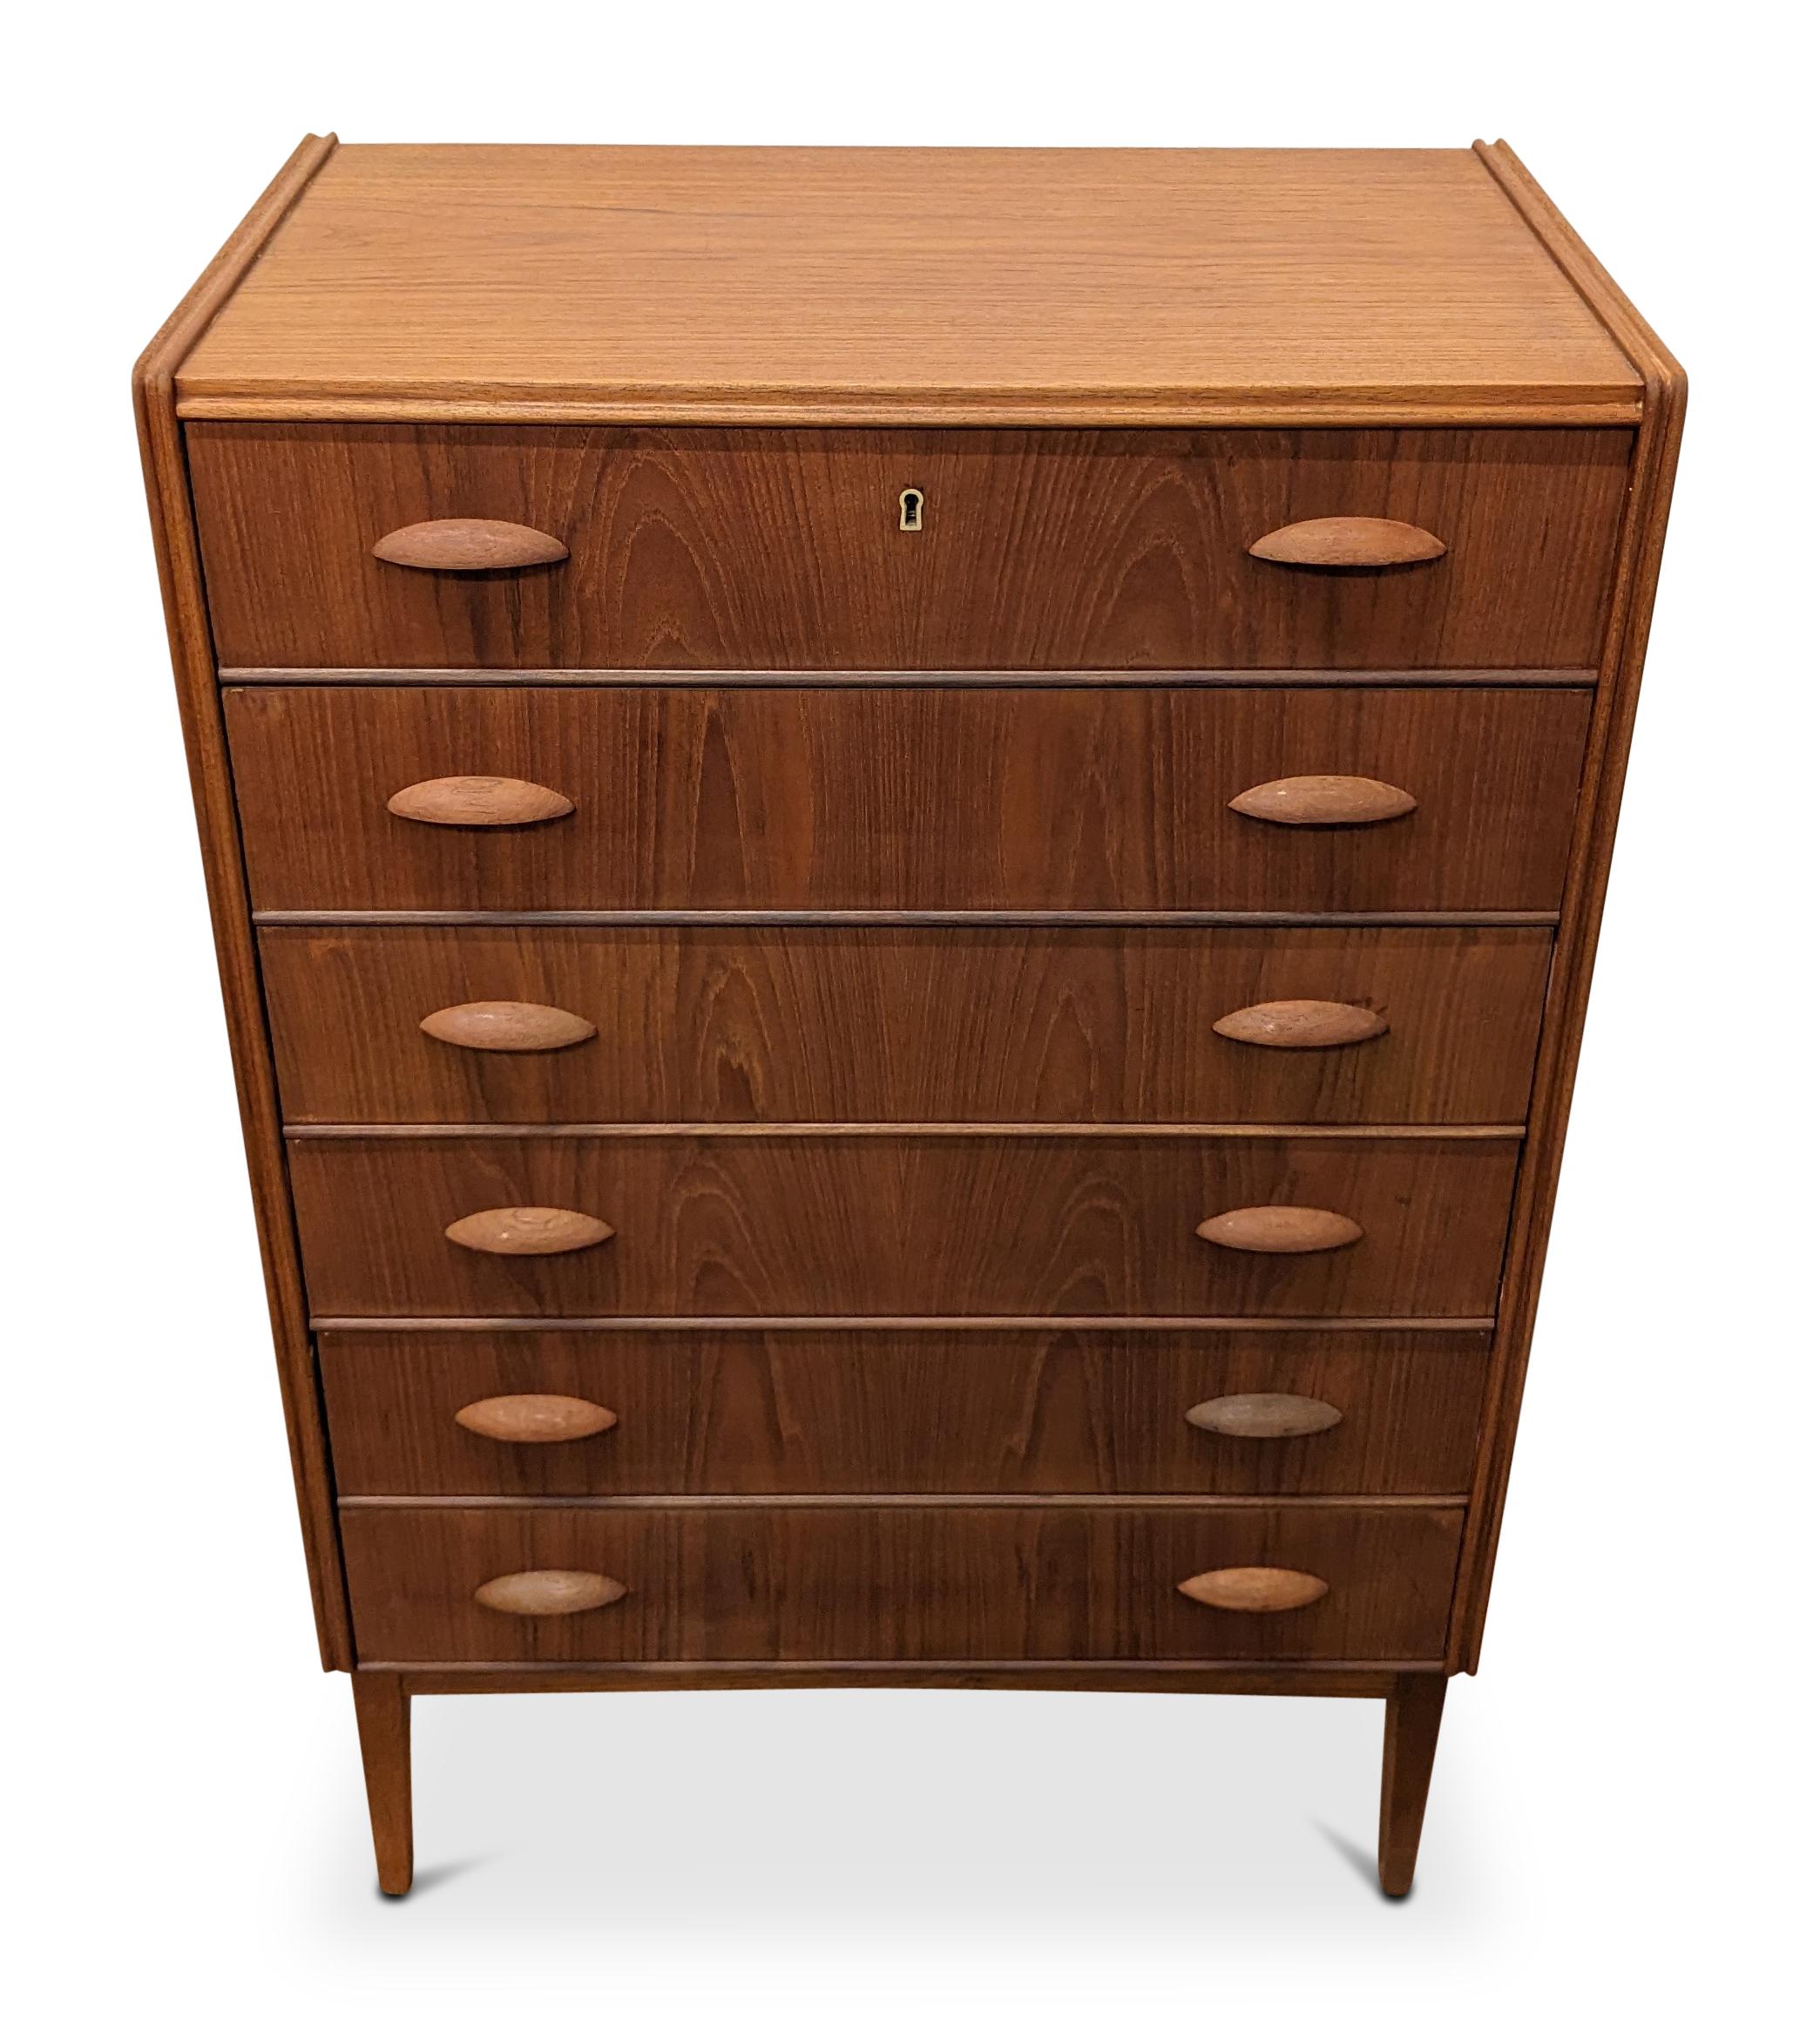 Vintage Danish Mid Century Teak Dresser - 122369 In Good Condition For Sale In Brooklyn, NY